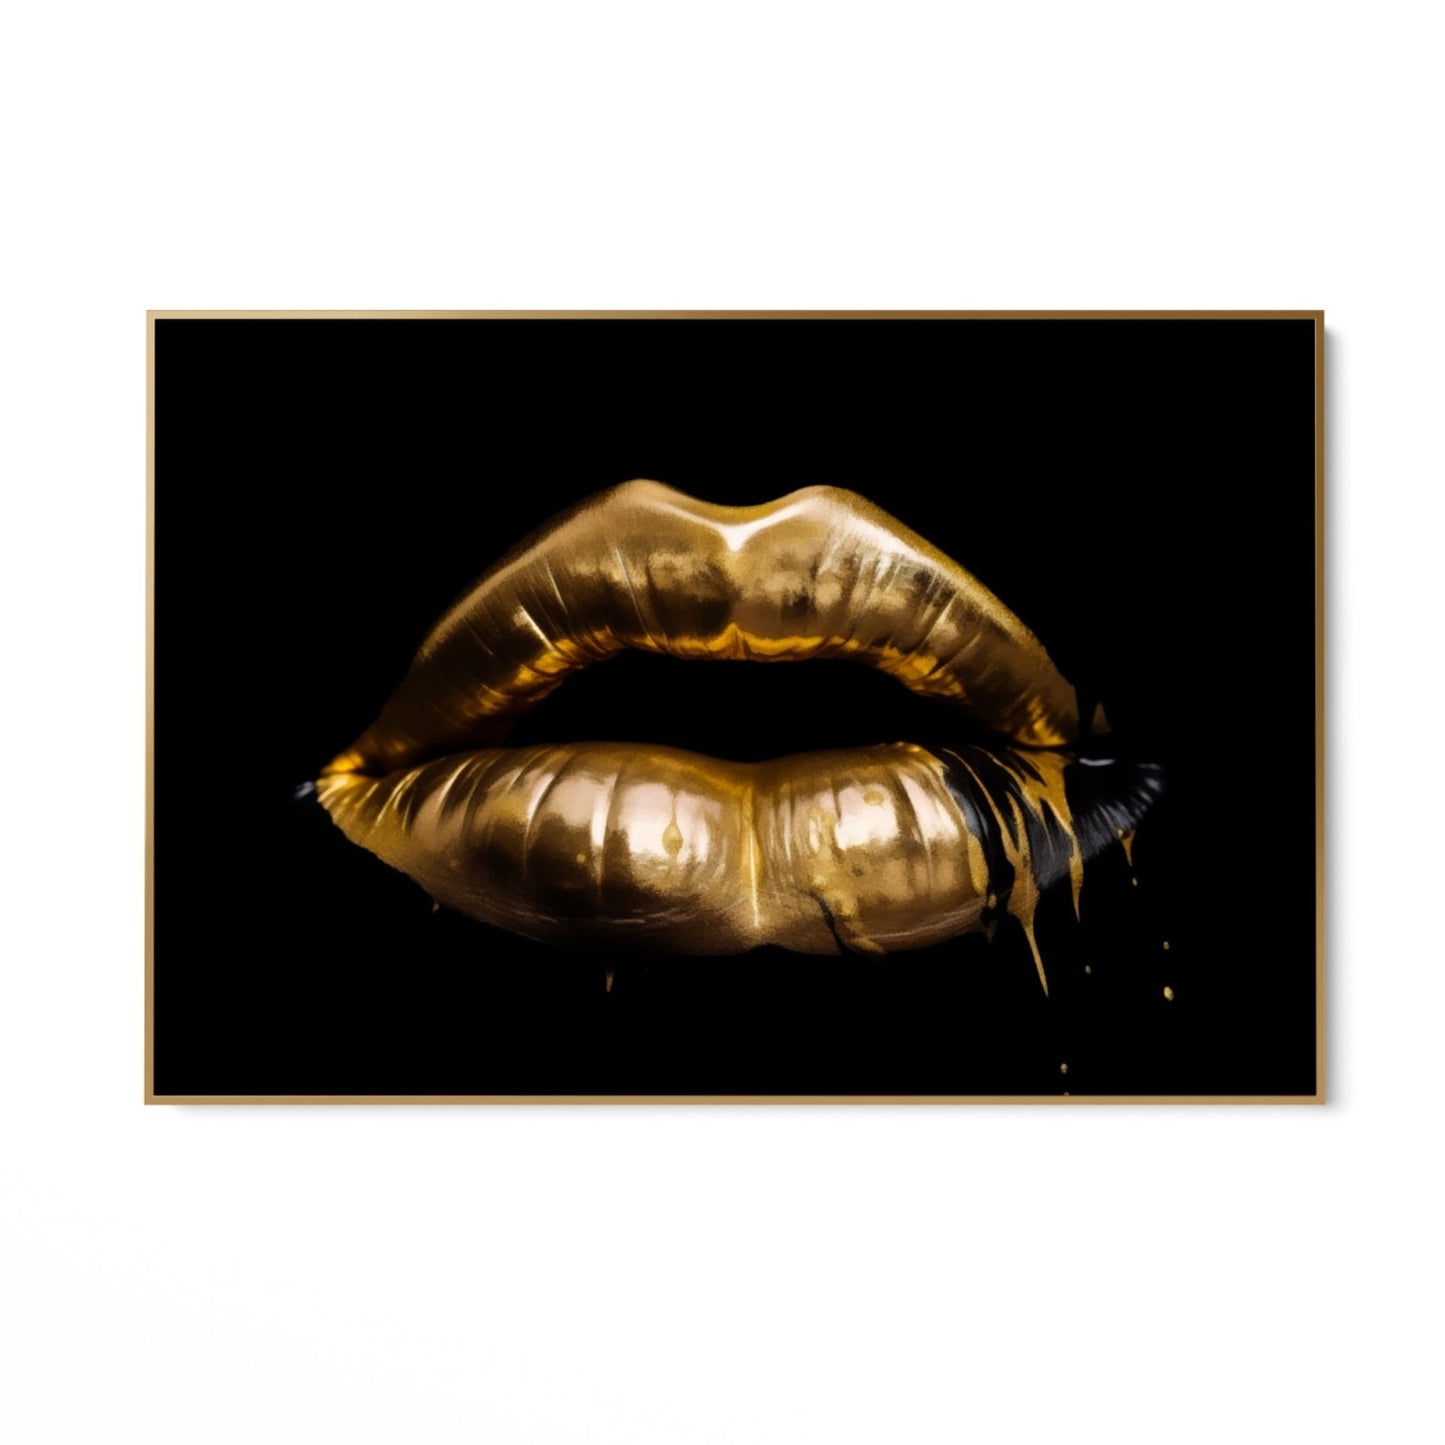 Special Gold Lips